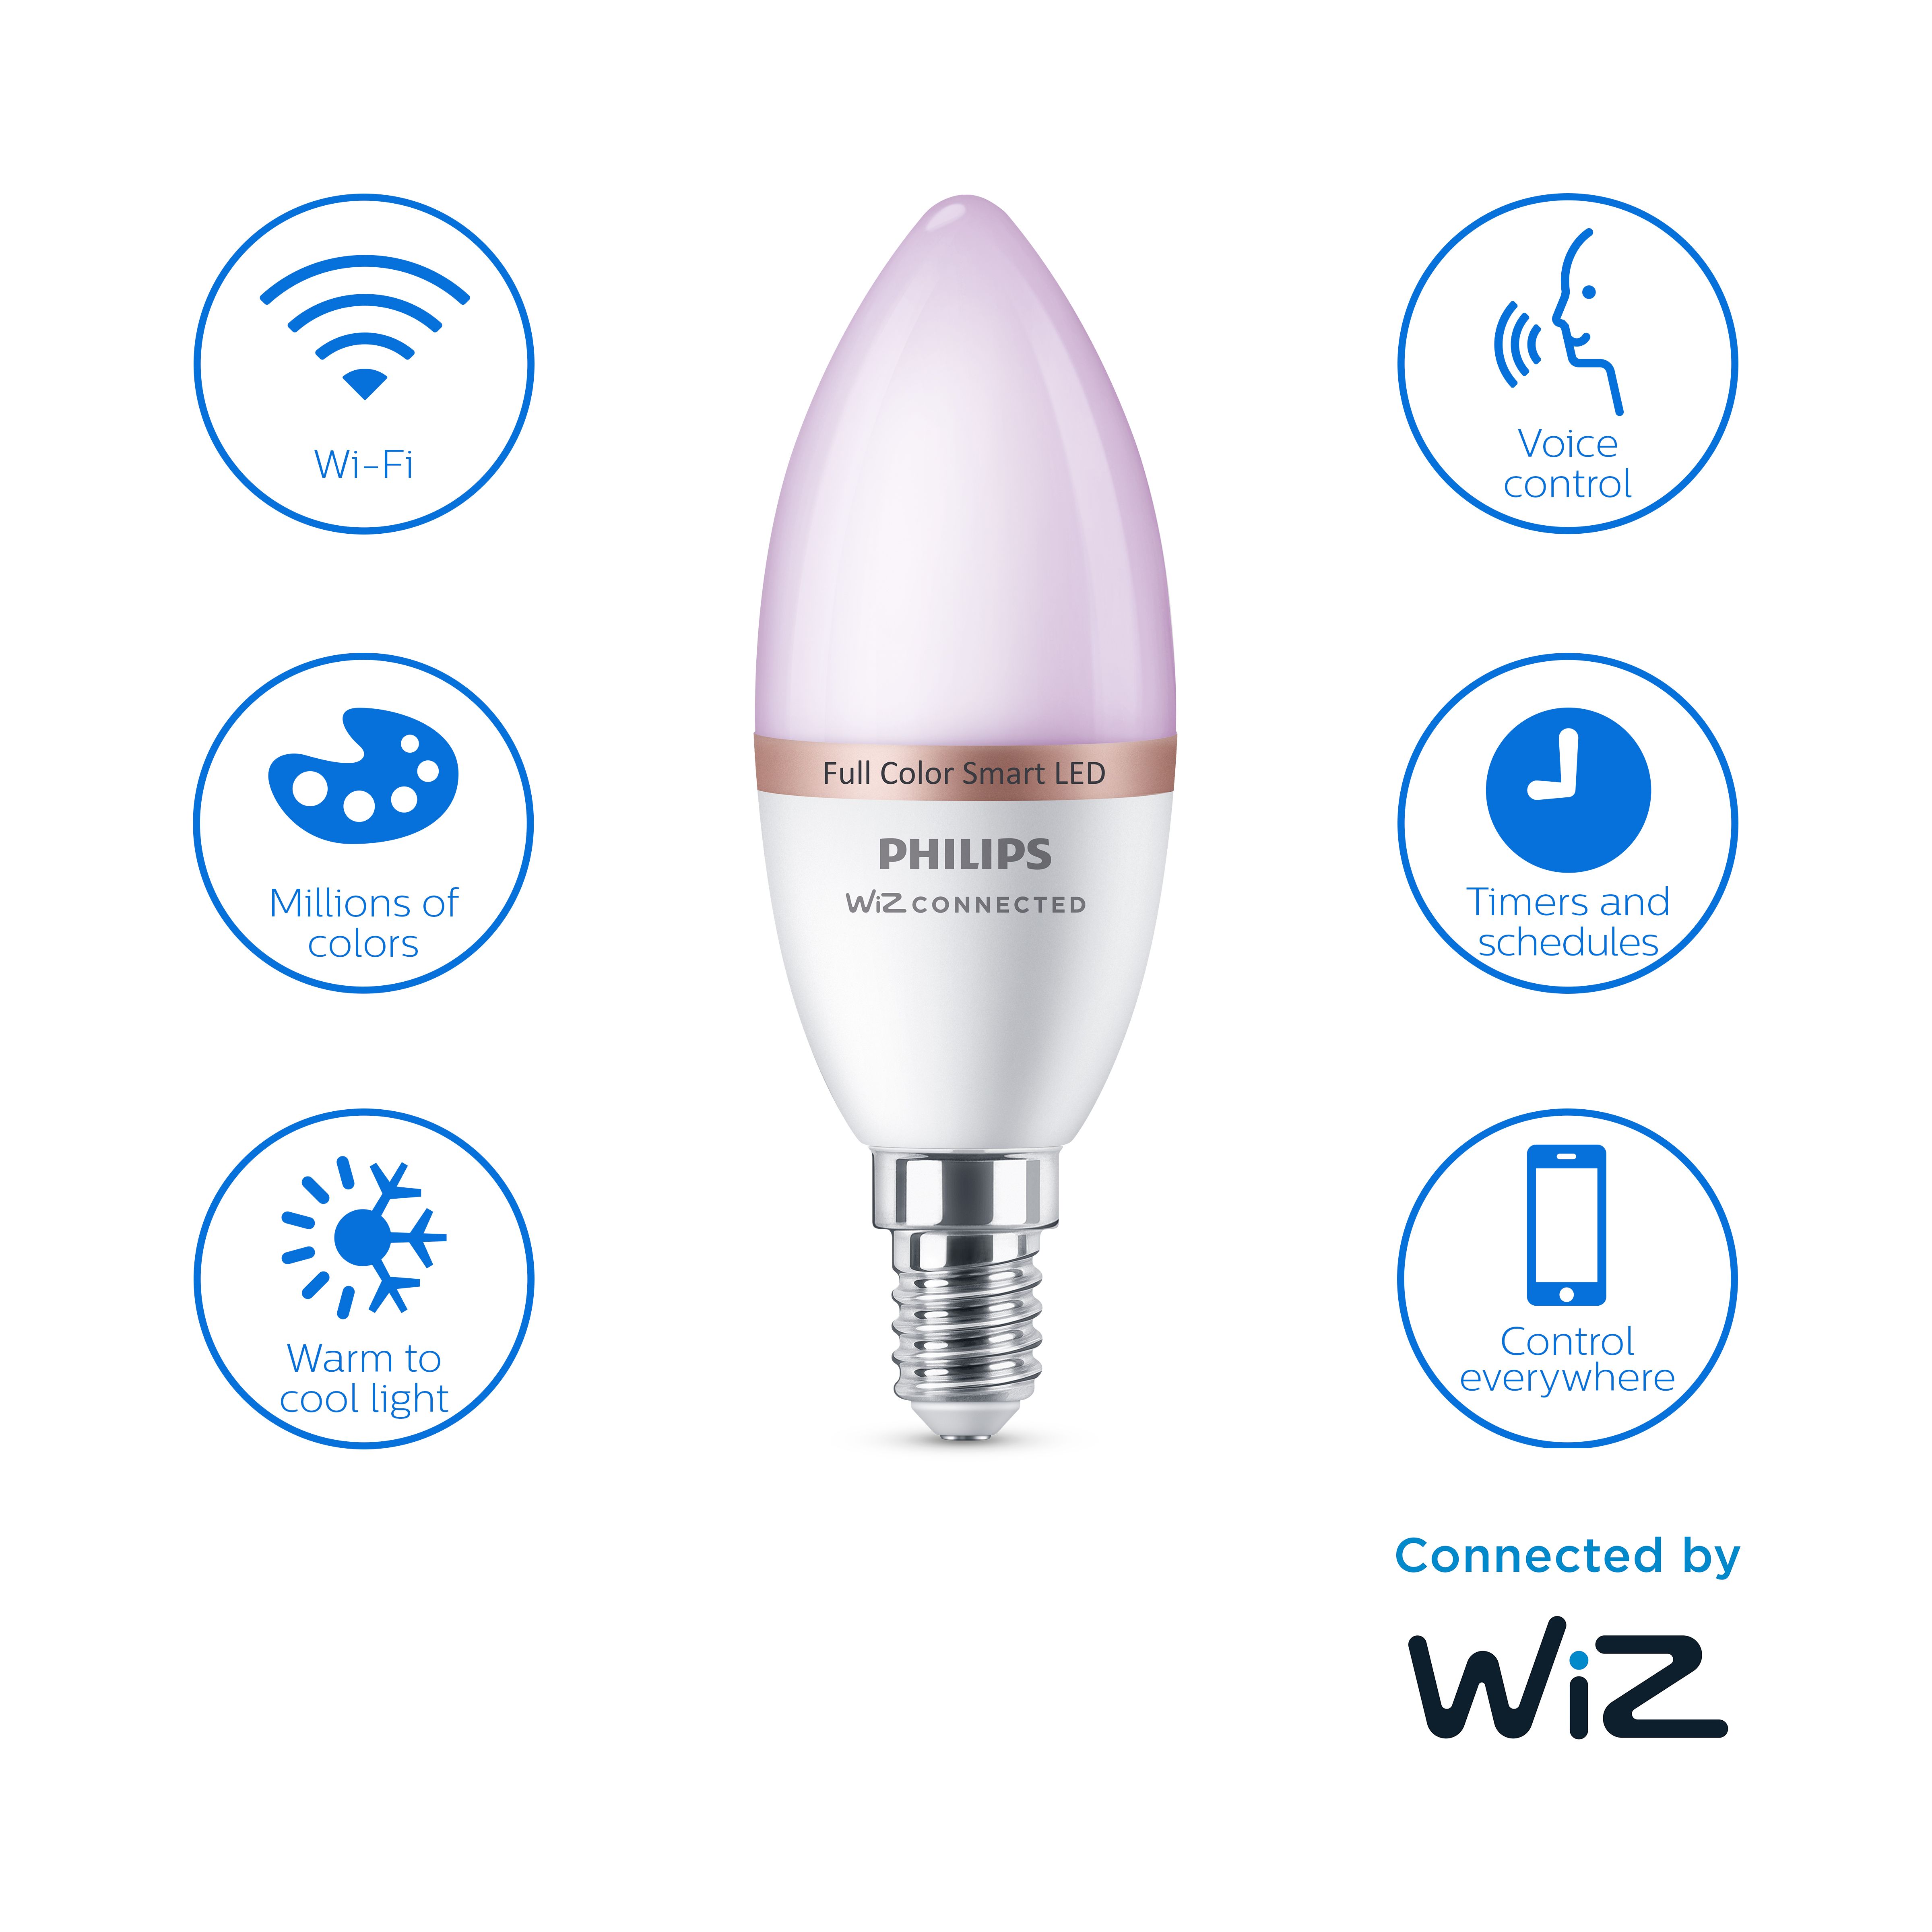 Philips WiZ SES 40W LED Cool white, RGB & warm white Candle Non-dimmable Light bulb Pack of 2